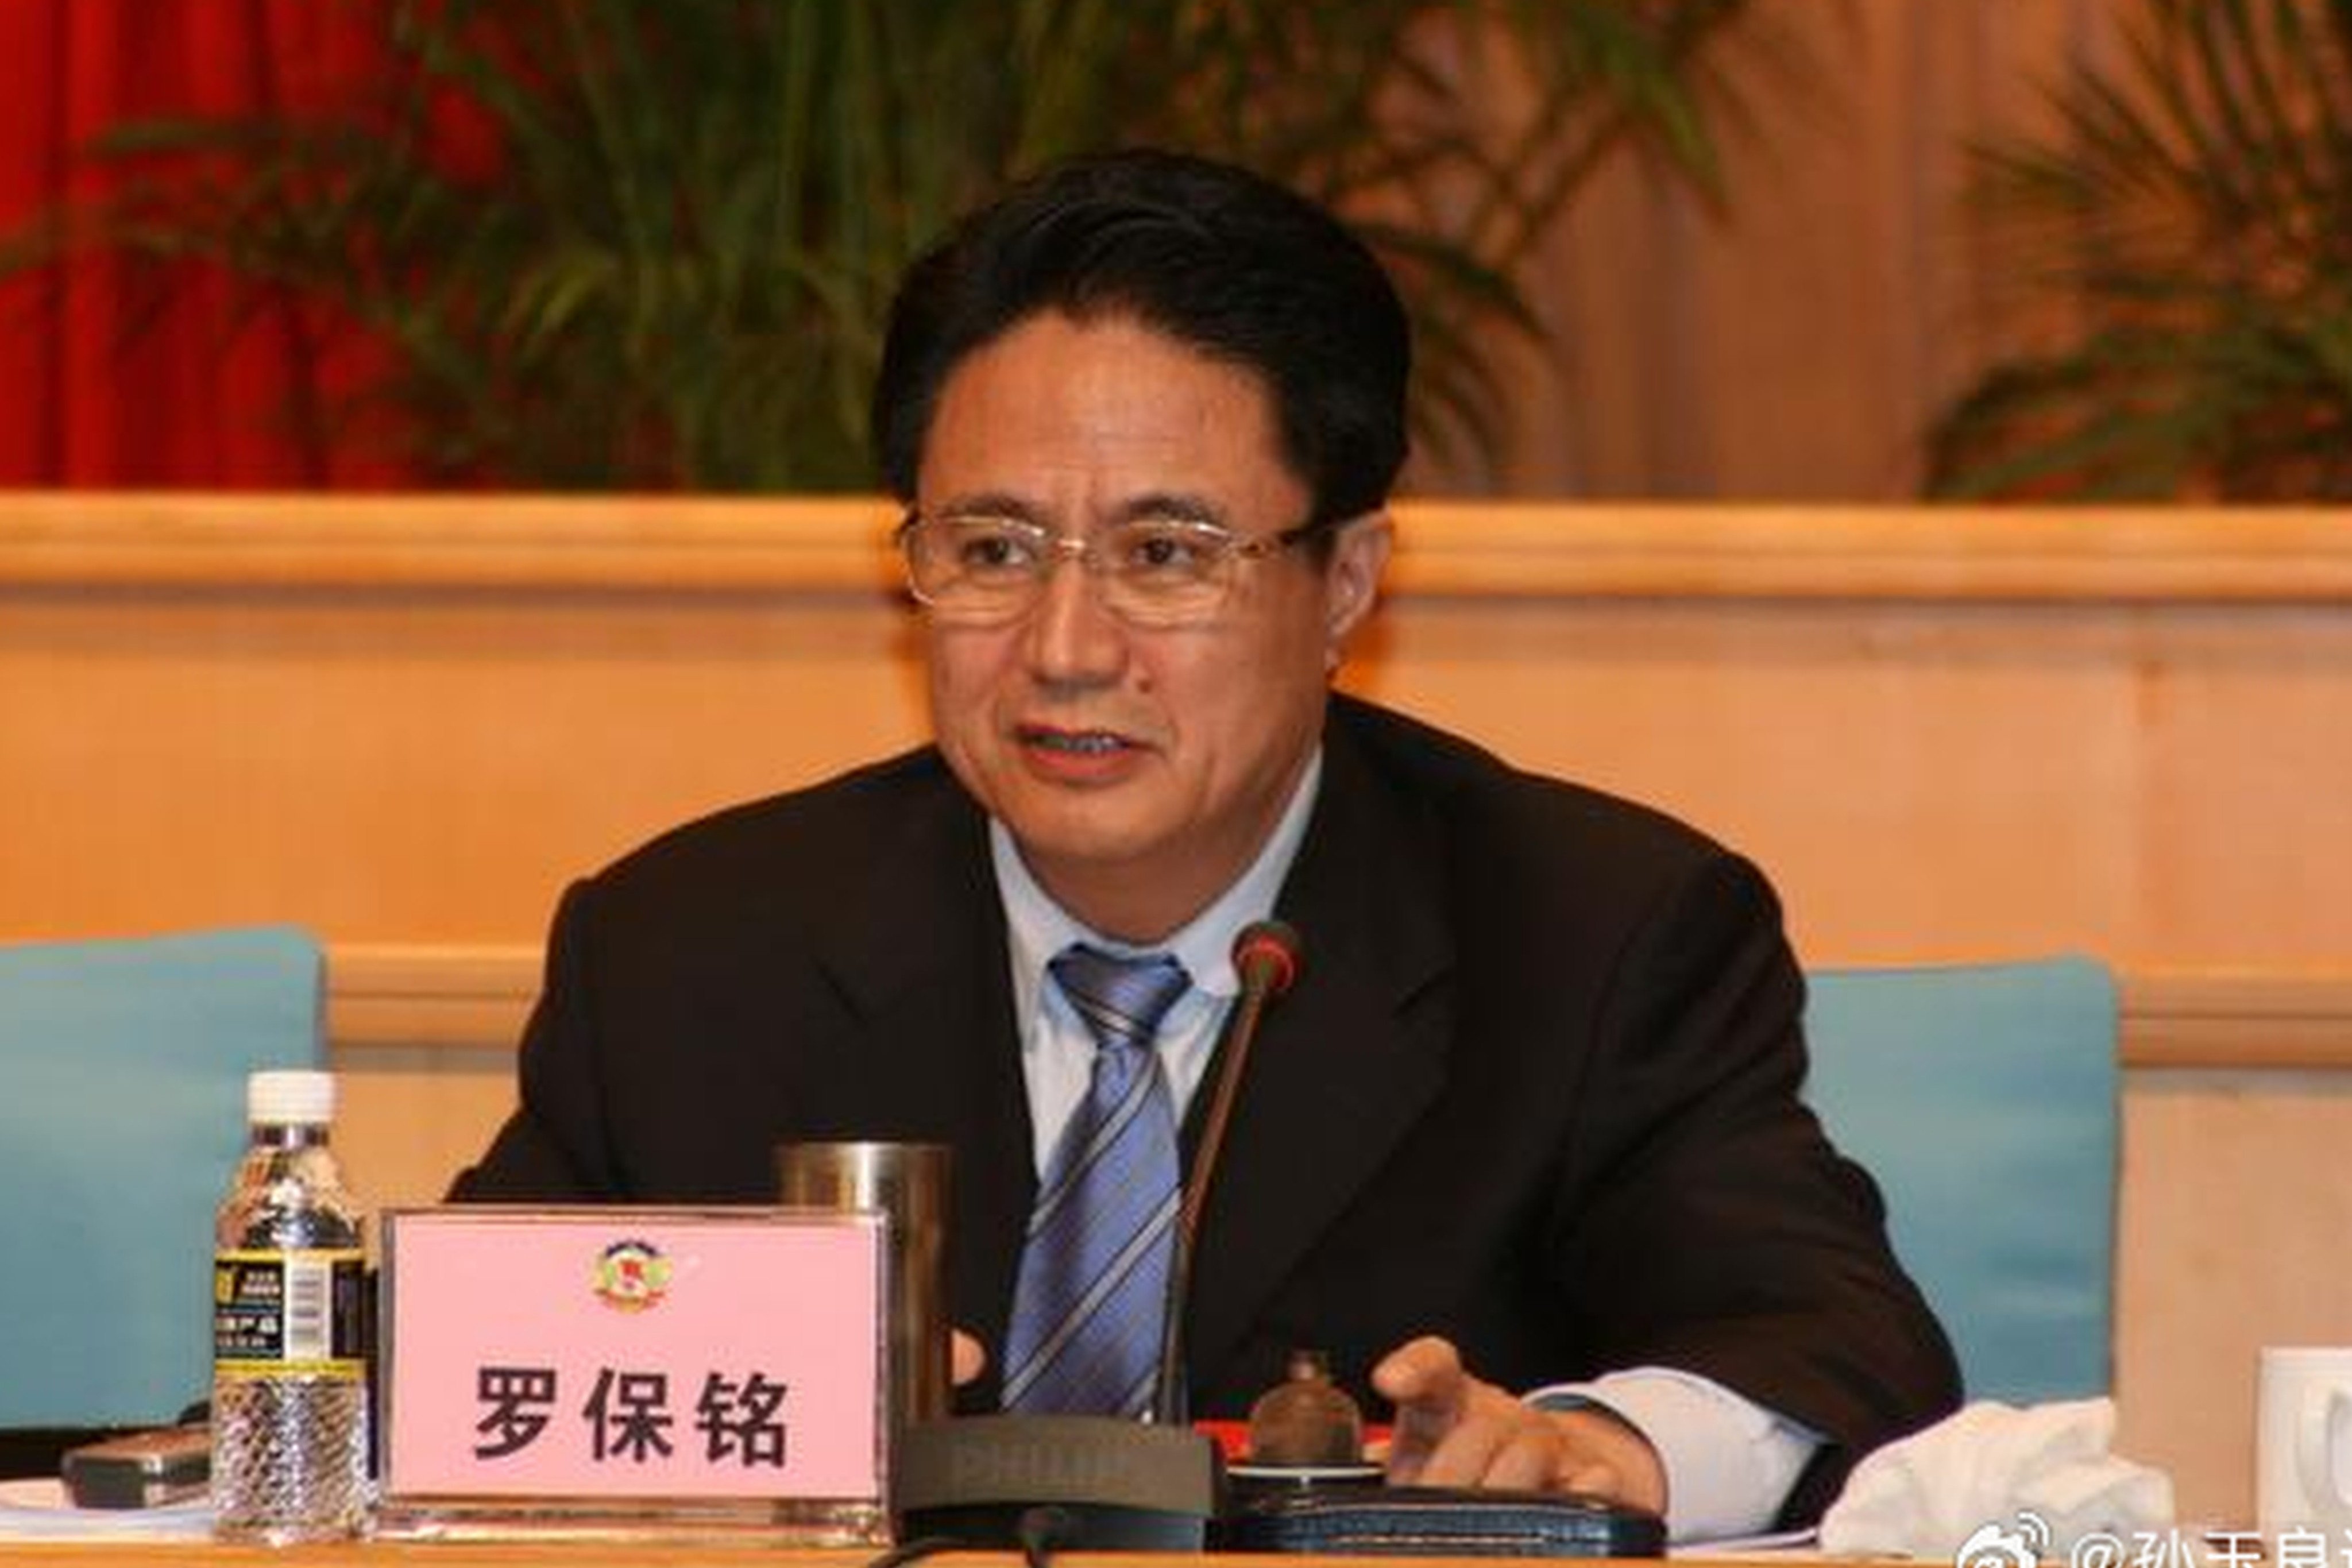 Former Communist Party boss of the southern Chinese province of Hainan, Luo Baoming. Photo: Weibo